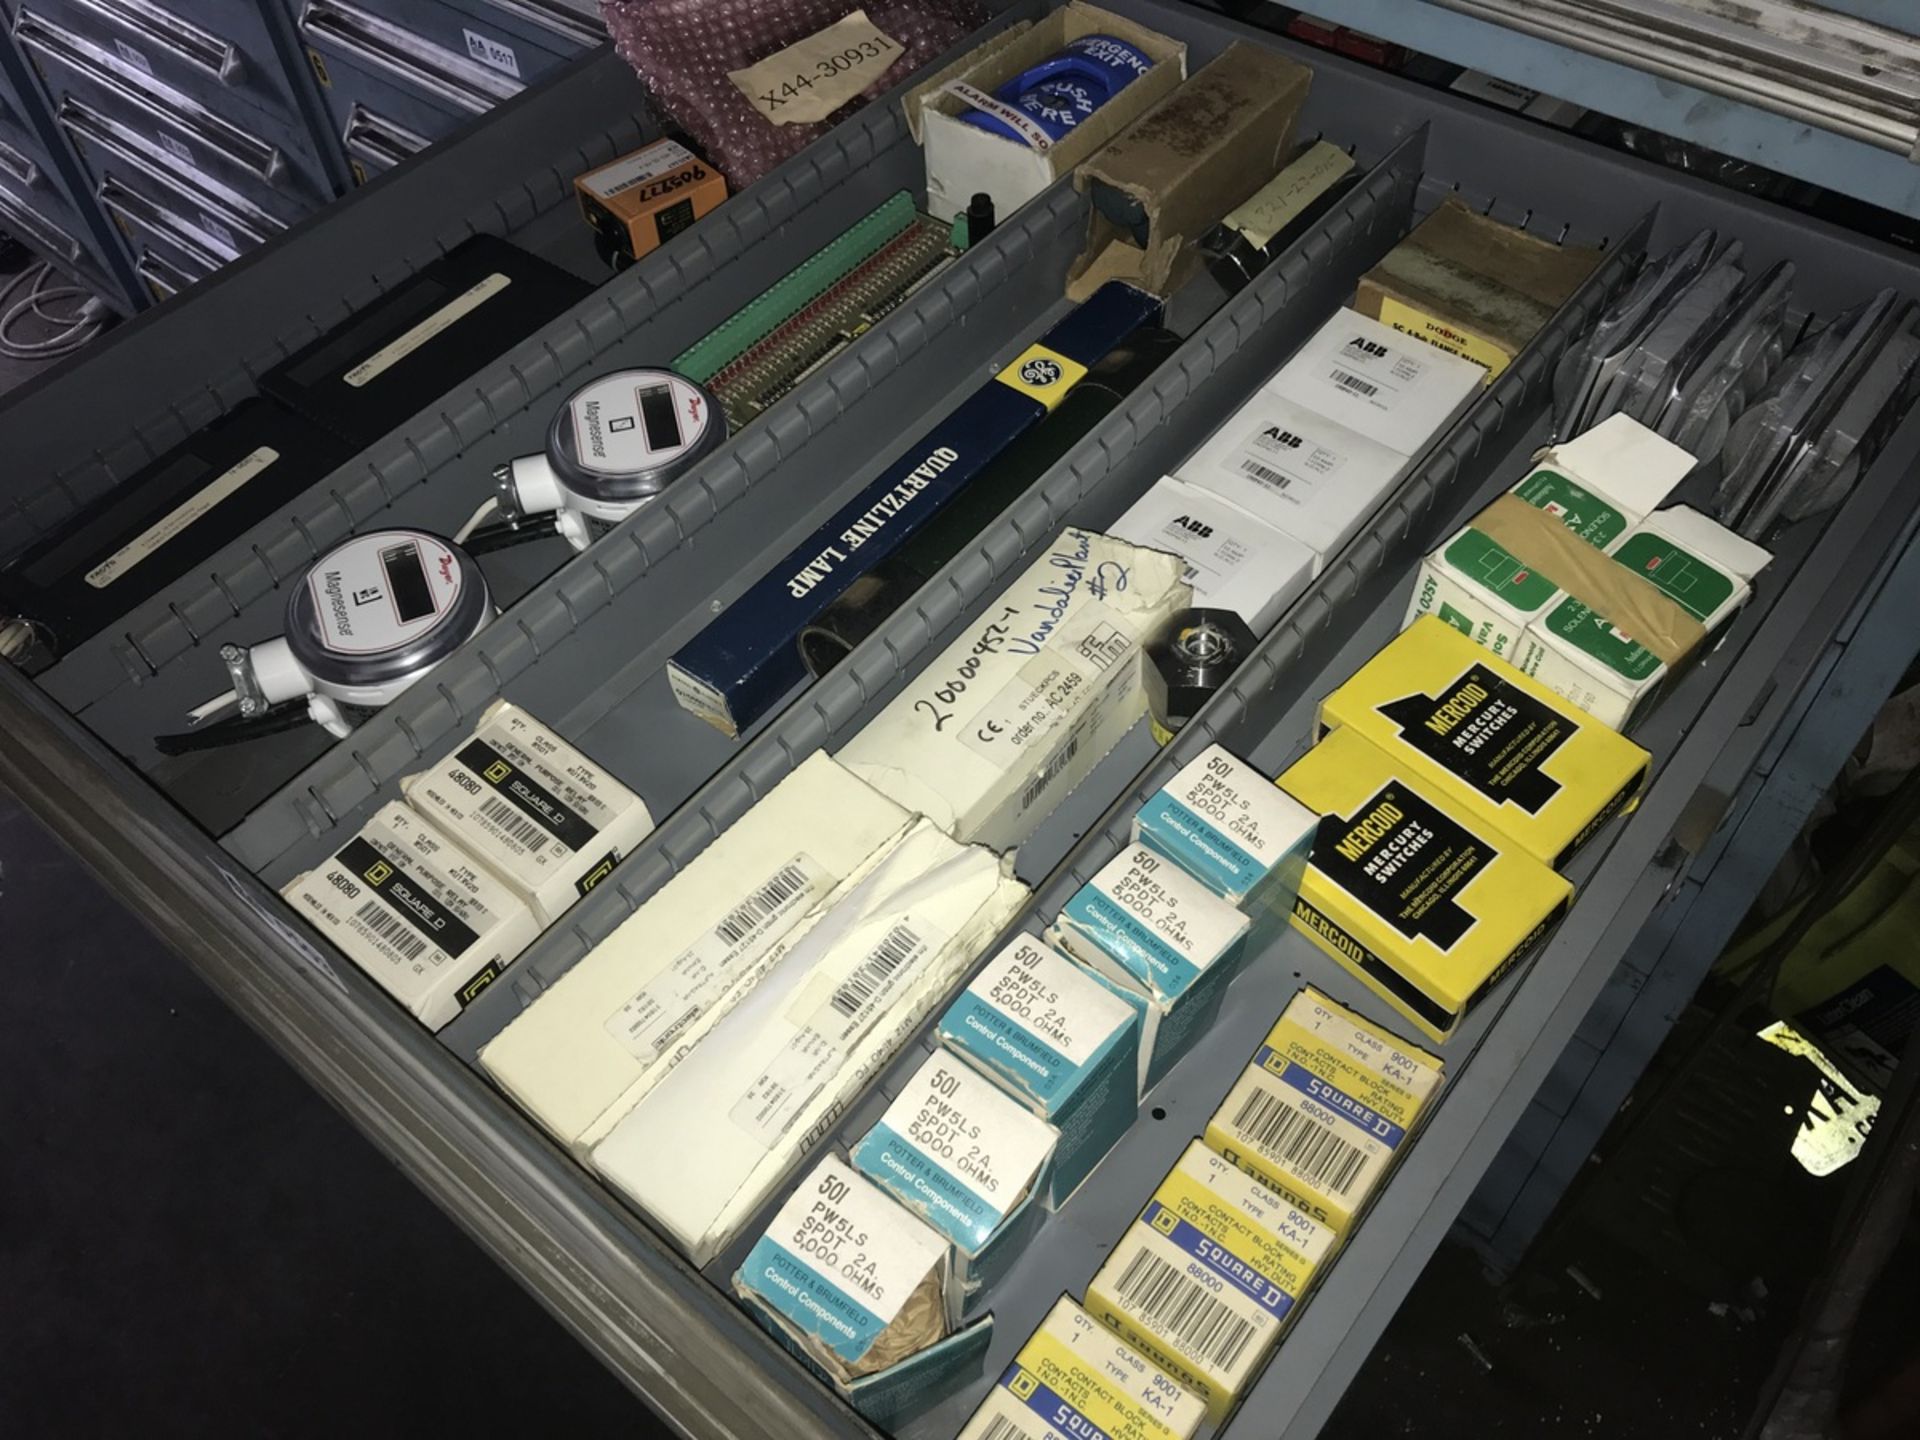 Contents of Drawer including Asco valves, ABB switches, Dwyer sensors, output modules, etc. - Image 2 of 3